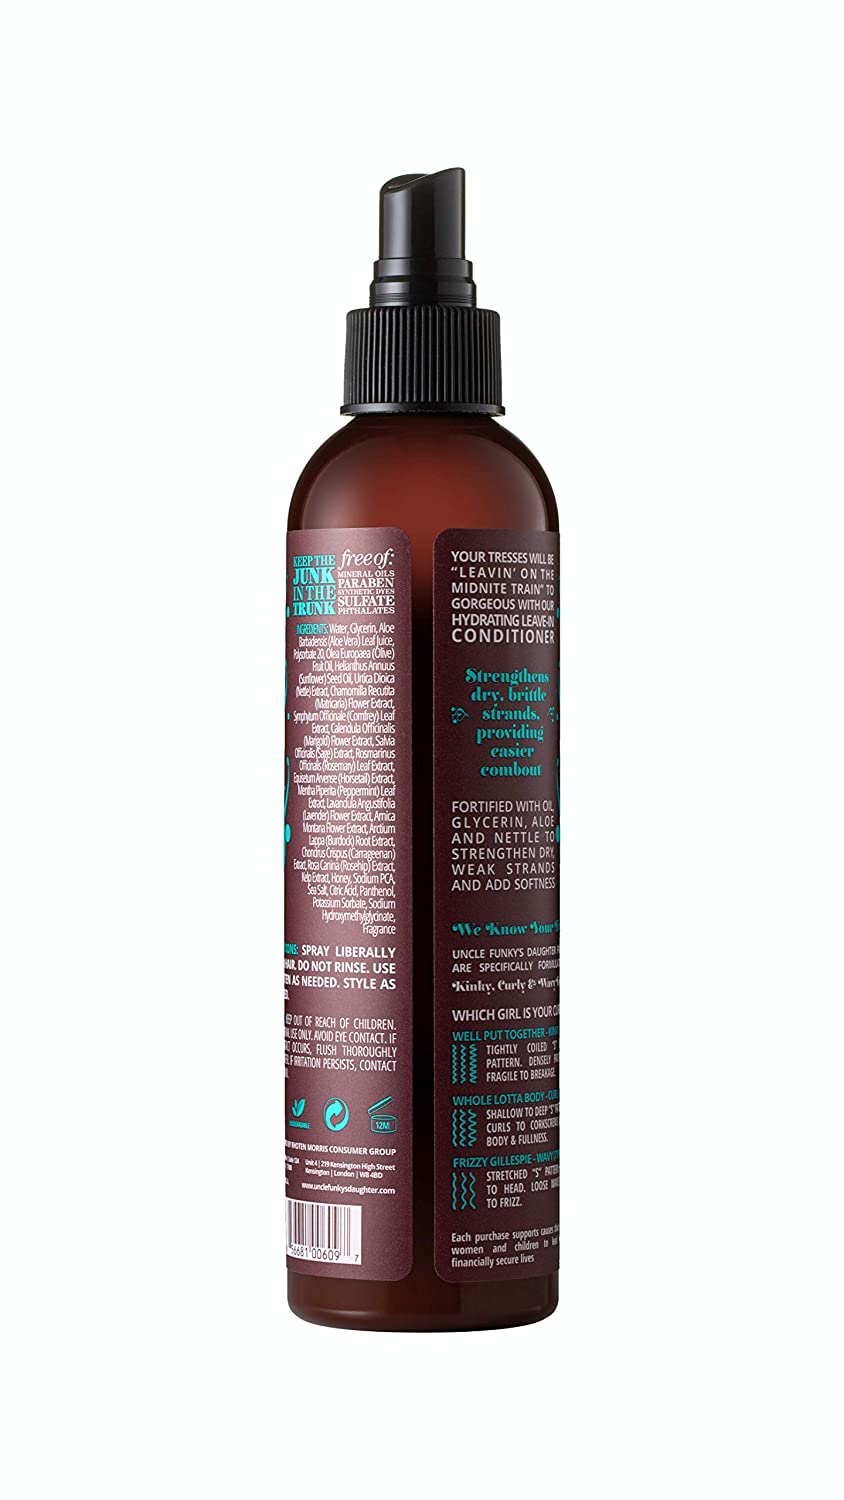 UNCLE FUNKY'S DAUGHTER MIDNITE TRAIN LEAVE IN CONDITIONER- 8 OZ